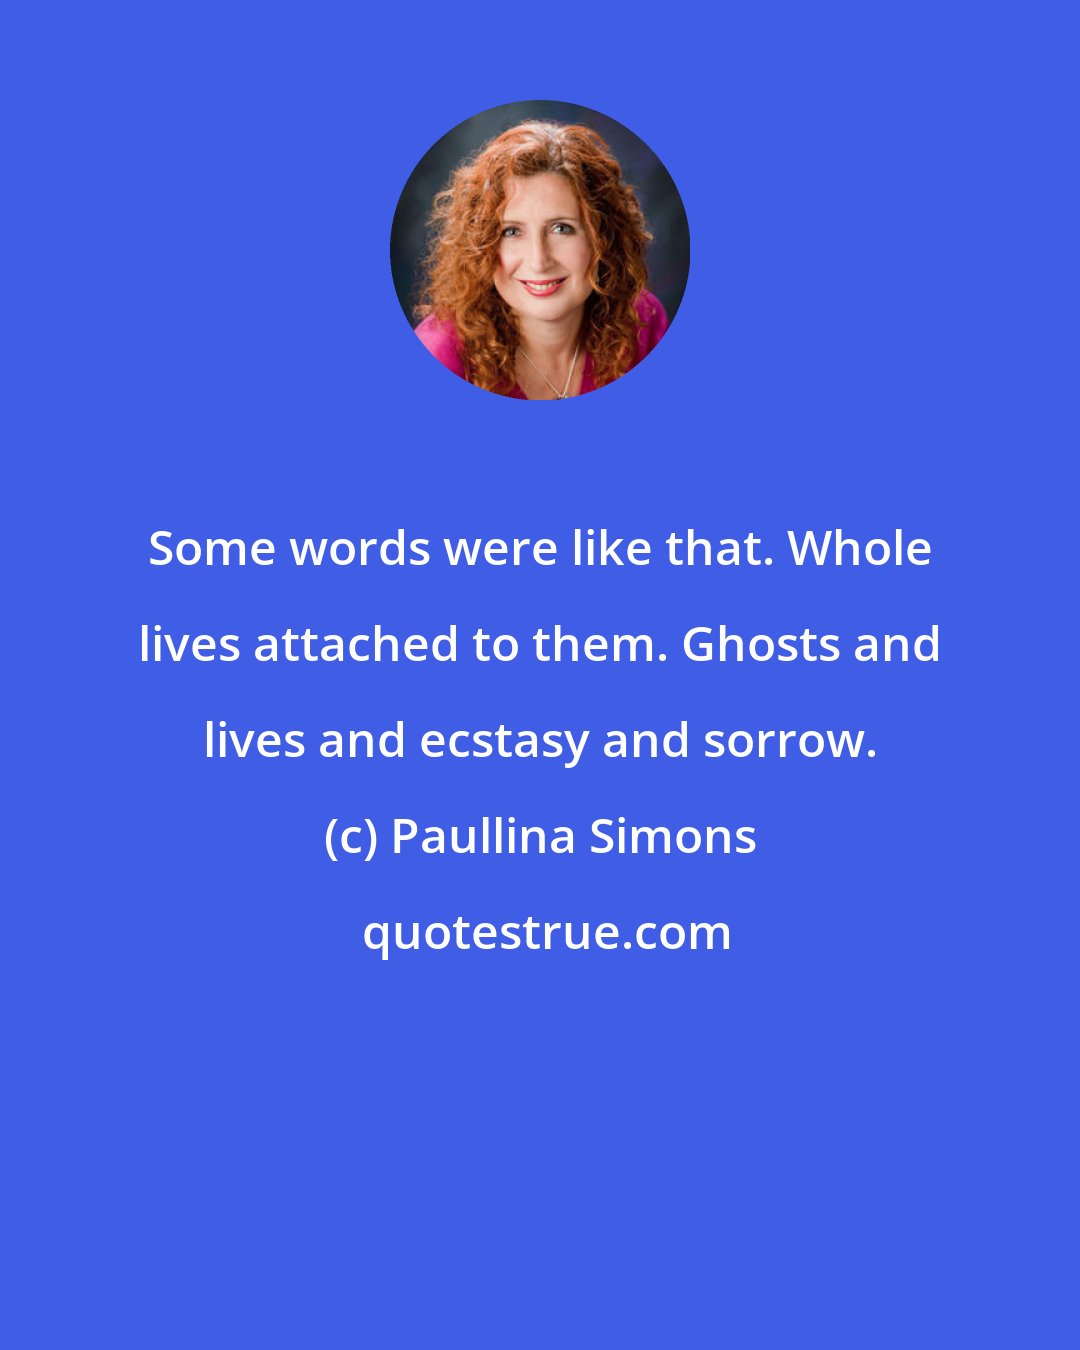 Paullina Simons: Some words were like that. Whole lives attached to them. Ghosts and lives and ecstasy and sorrow.